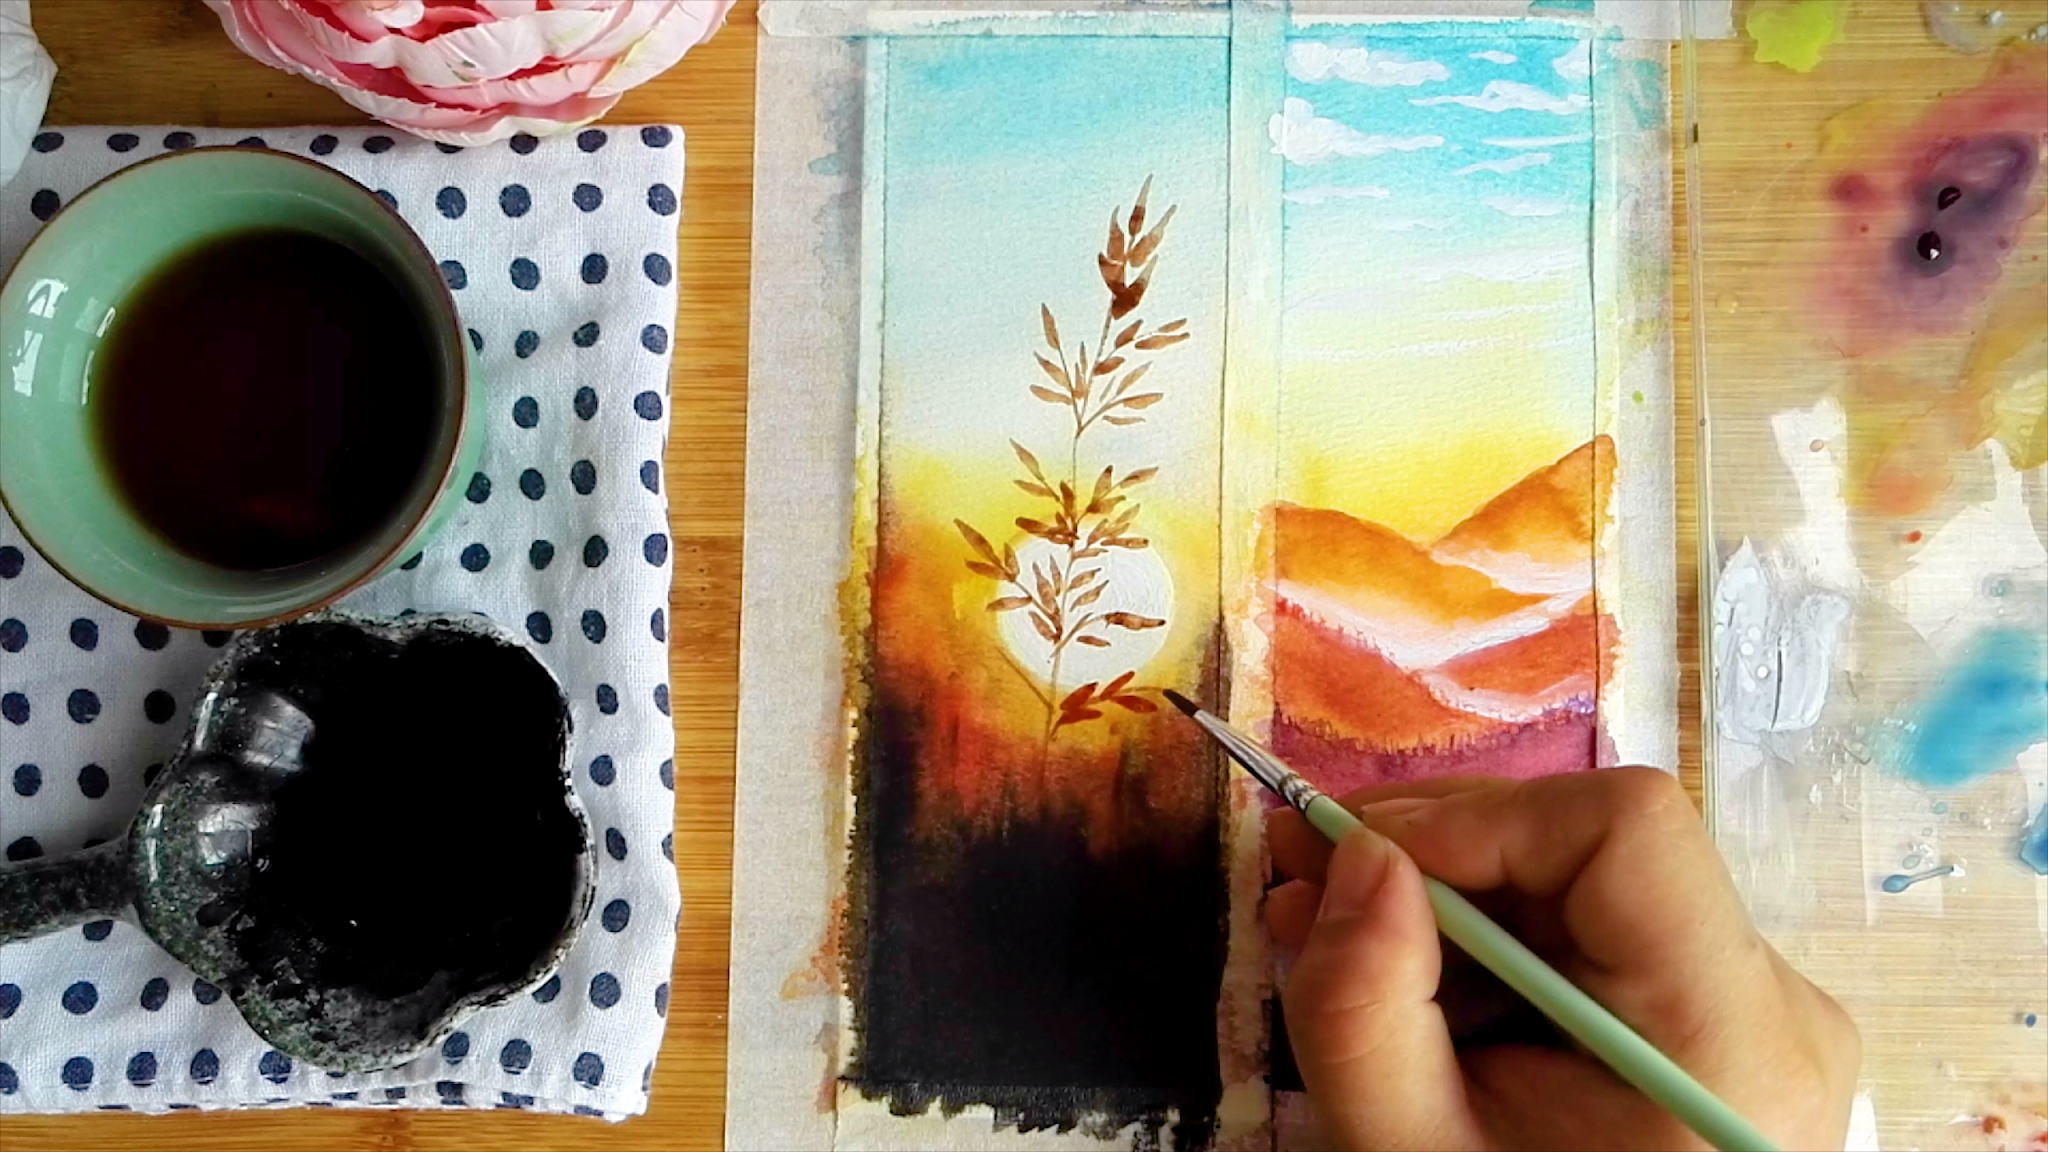 2Draw with black tea watercolor sunset landscape tutorial, come to see my online class